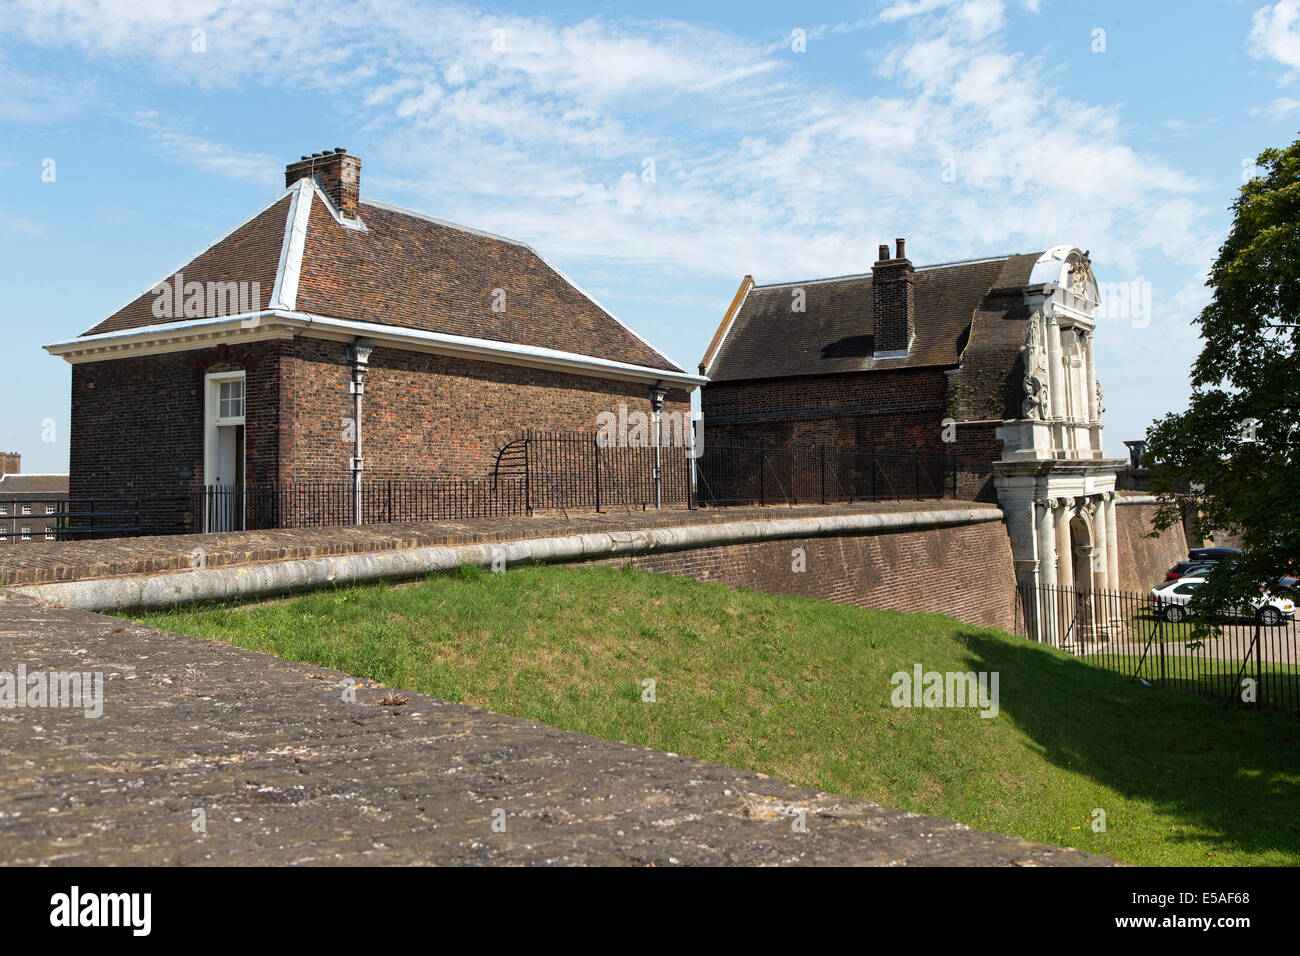 Guard house & chapel at Tilbury Fort, Essex, England, UK. Stock Photo